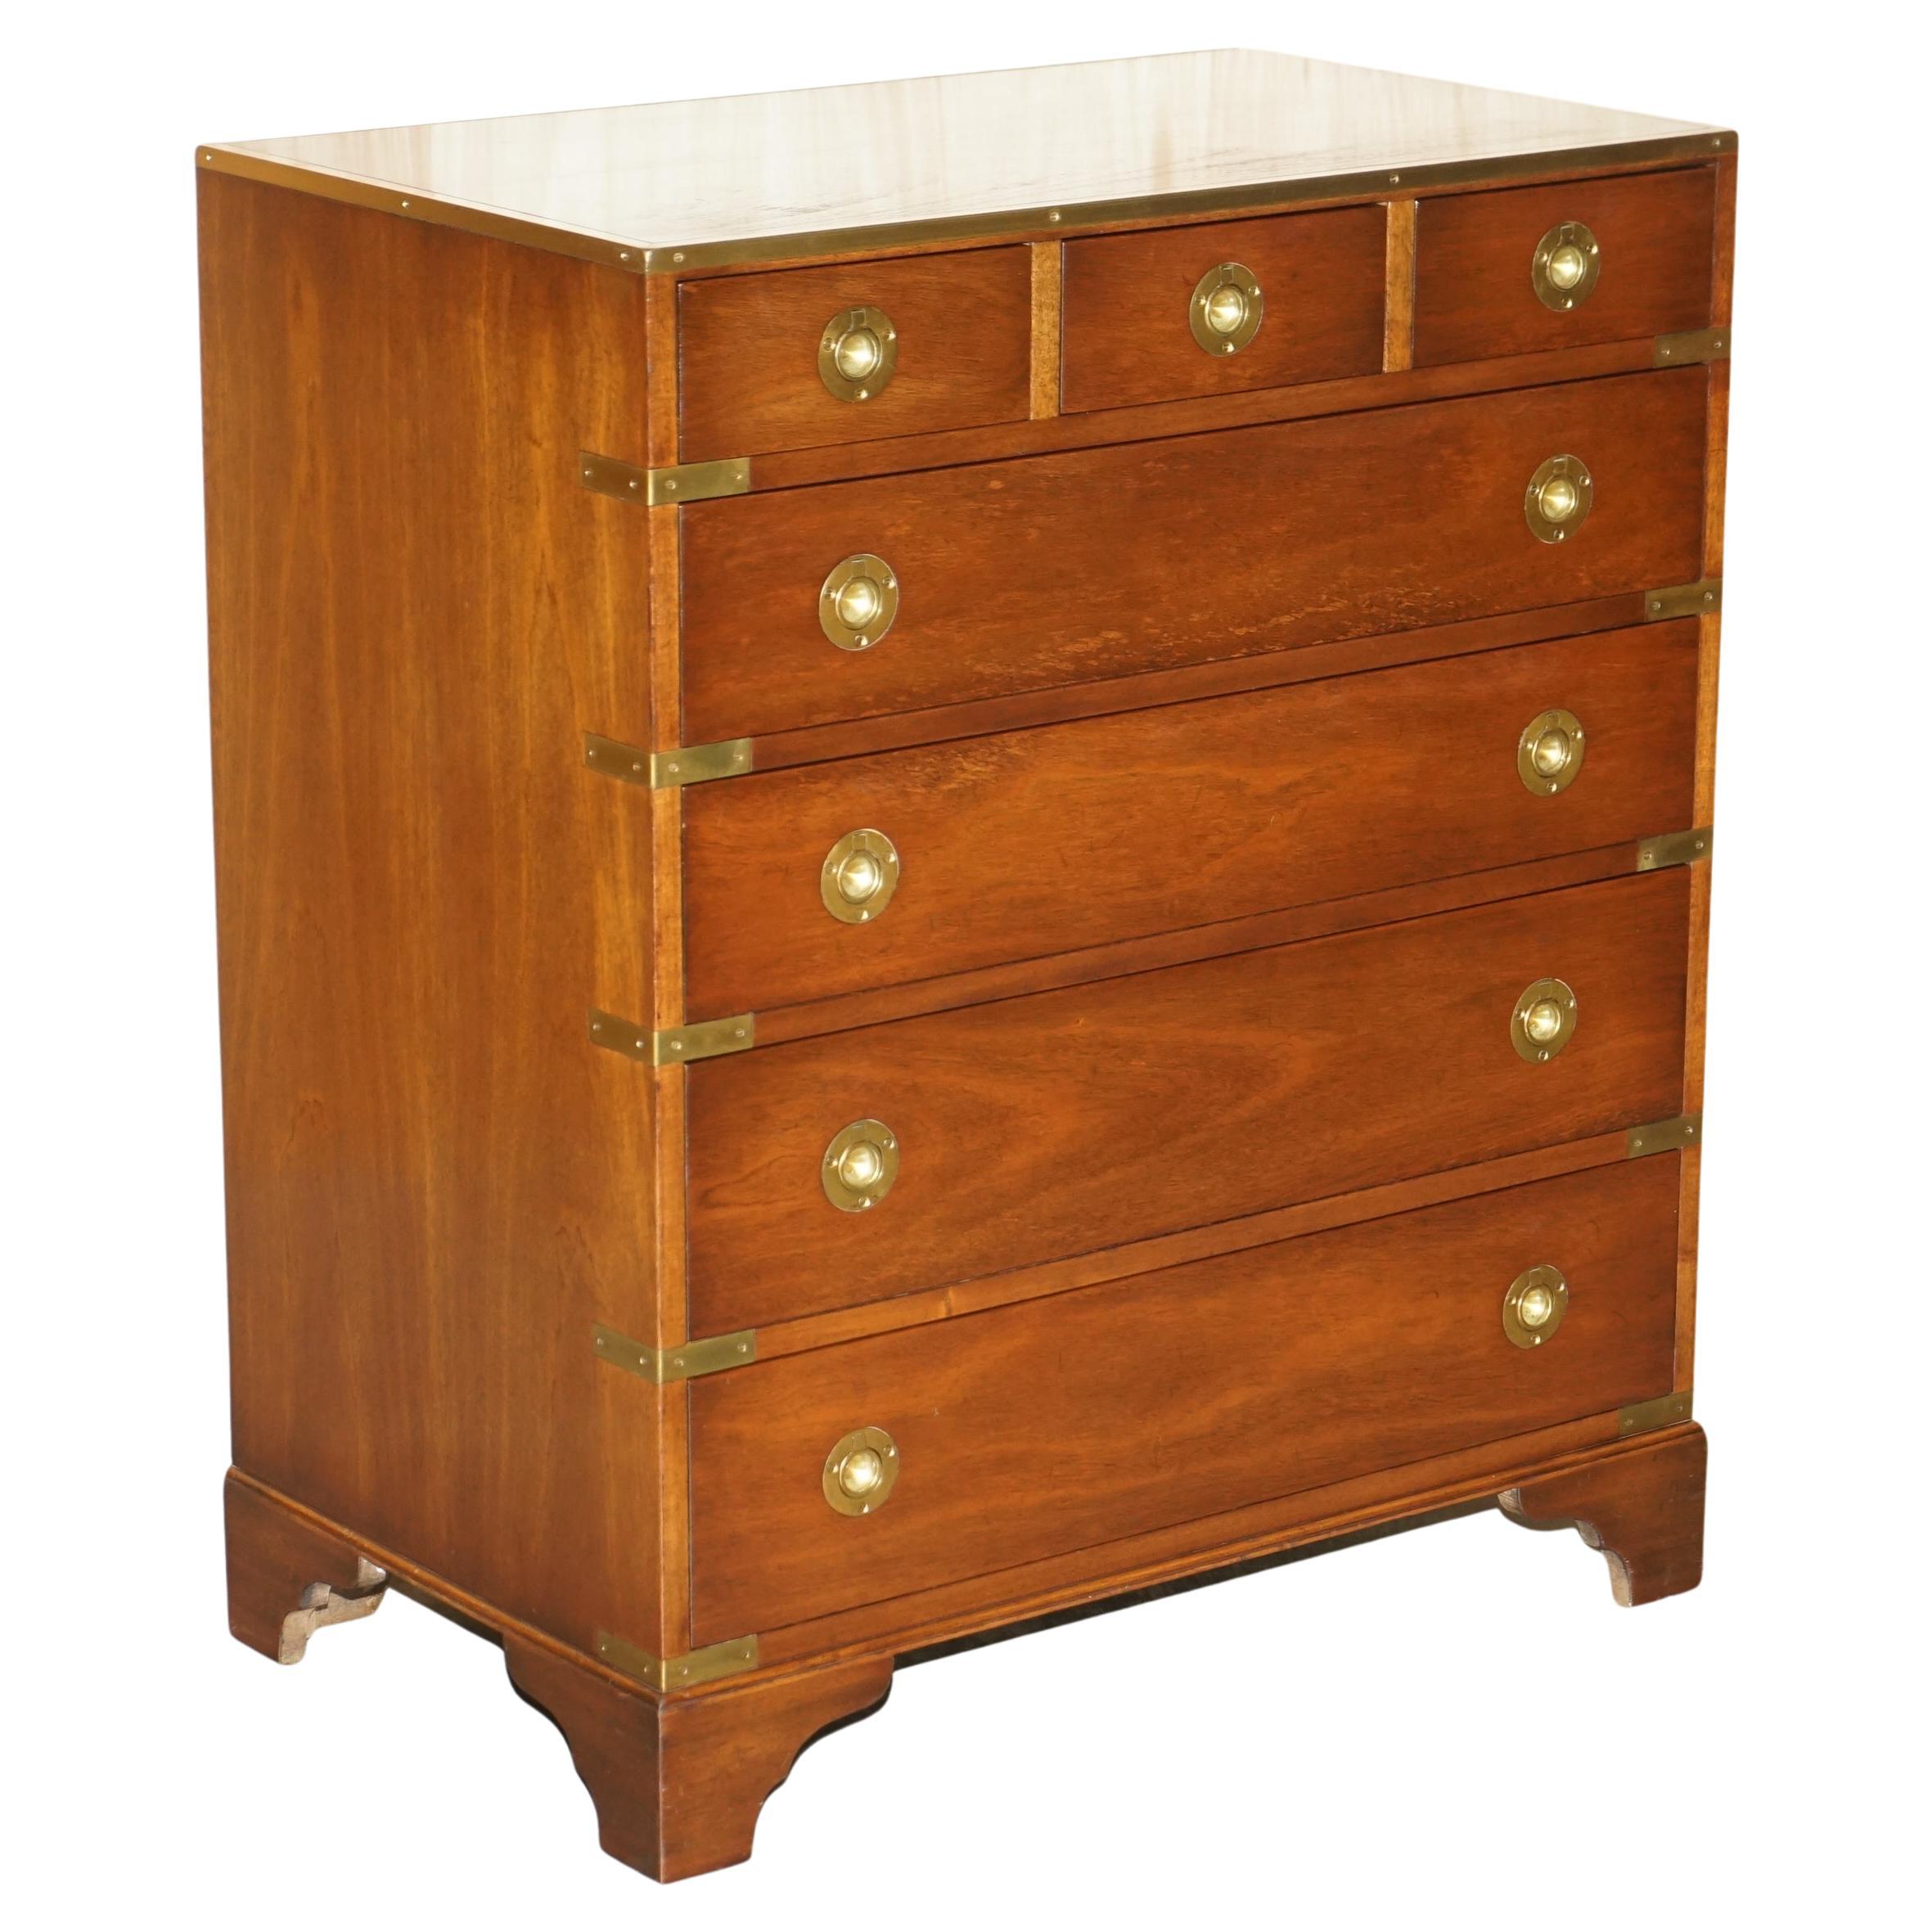 Lovely Harrods Kennedy Military Campaign Full Sized Chest of Drawers Must See For Sale